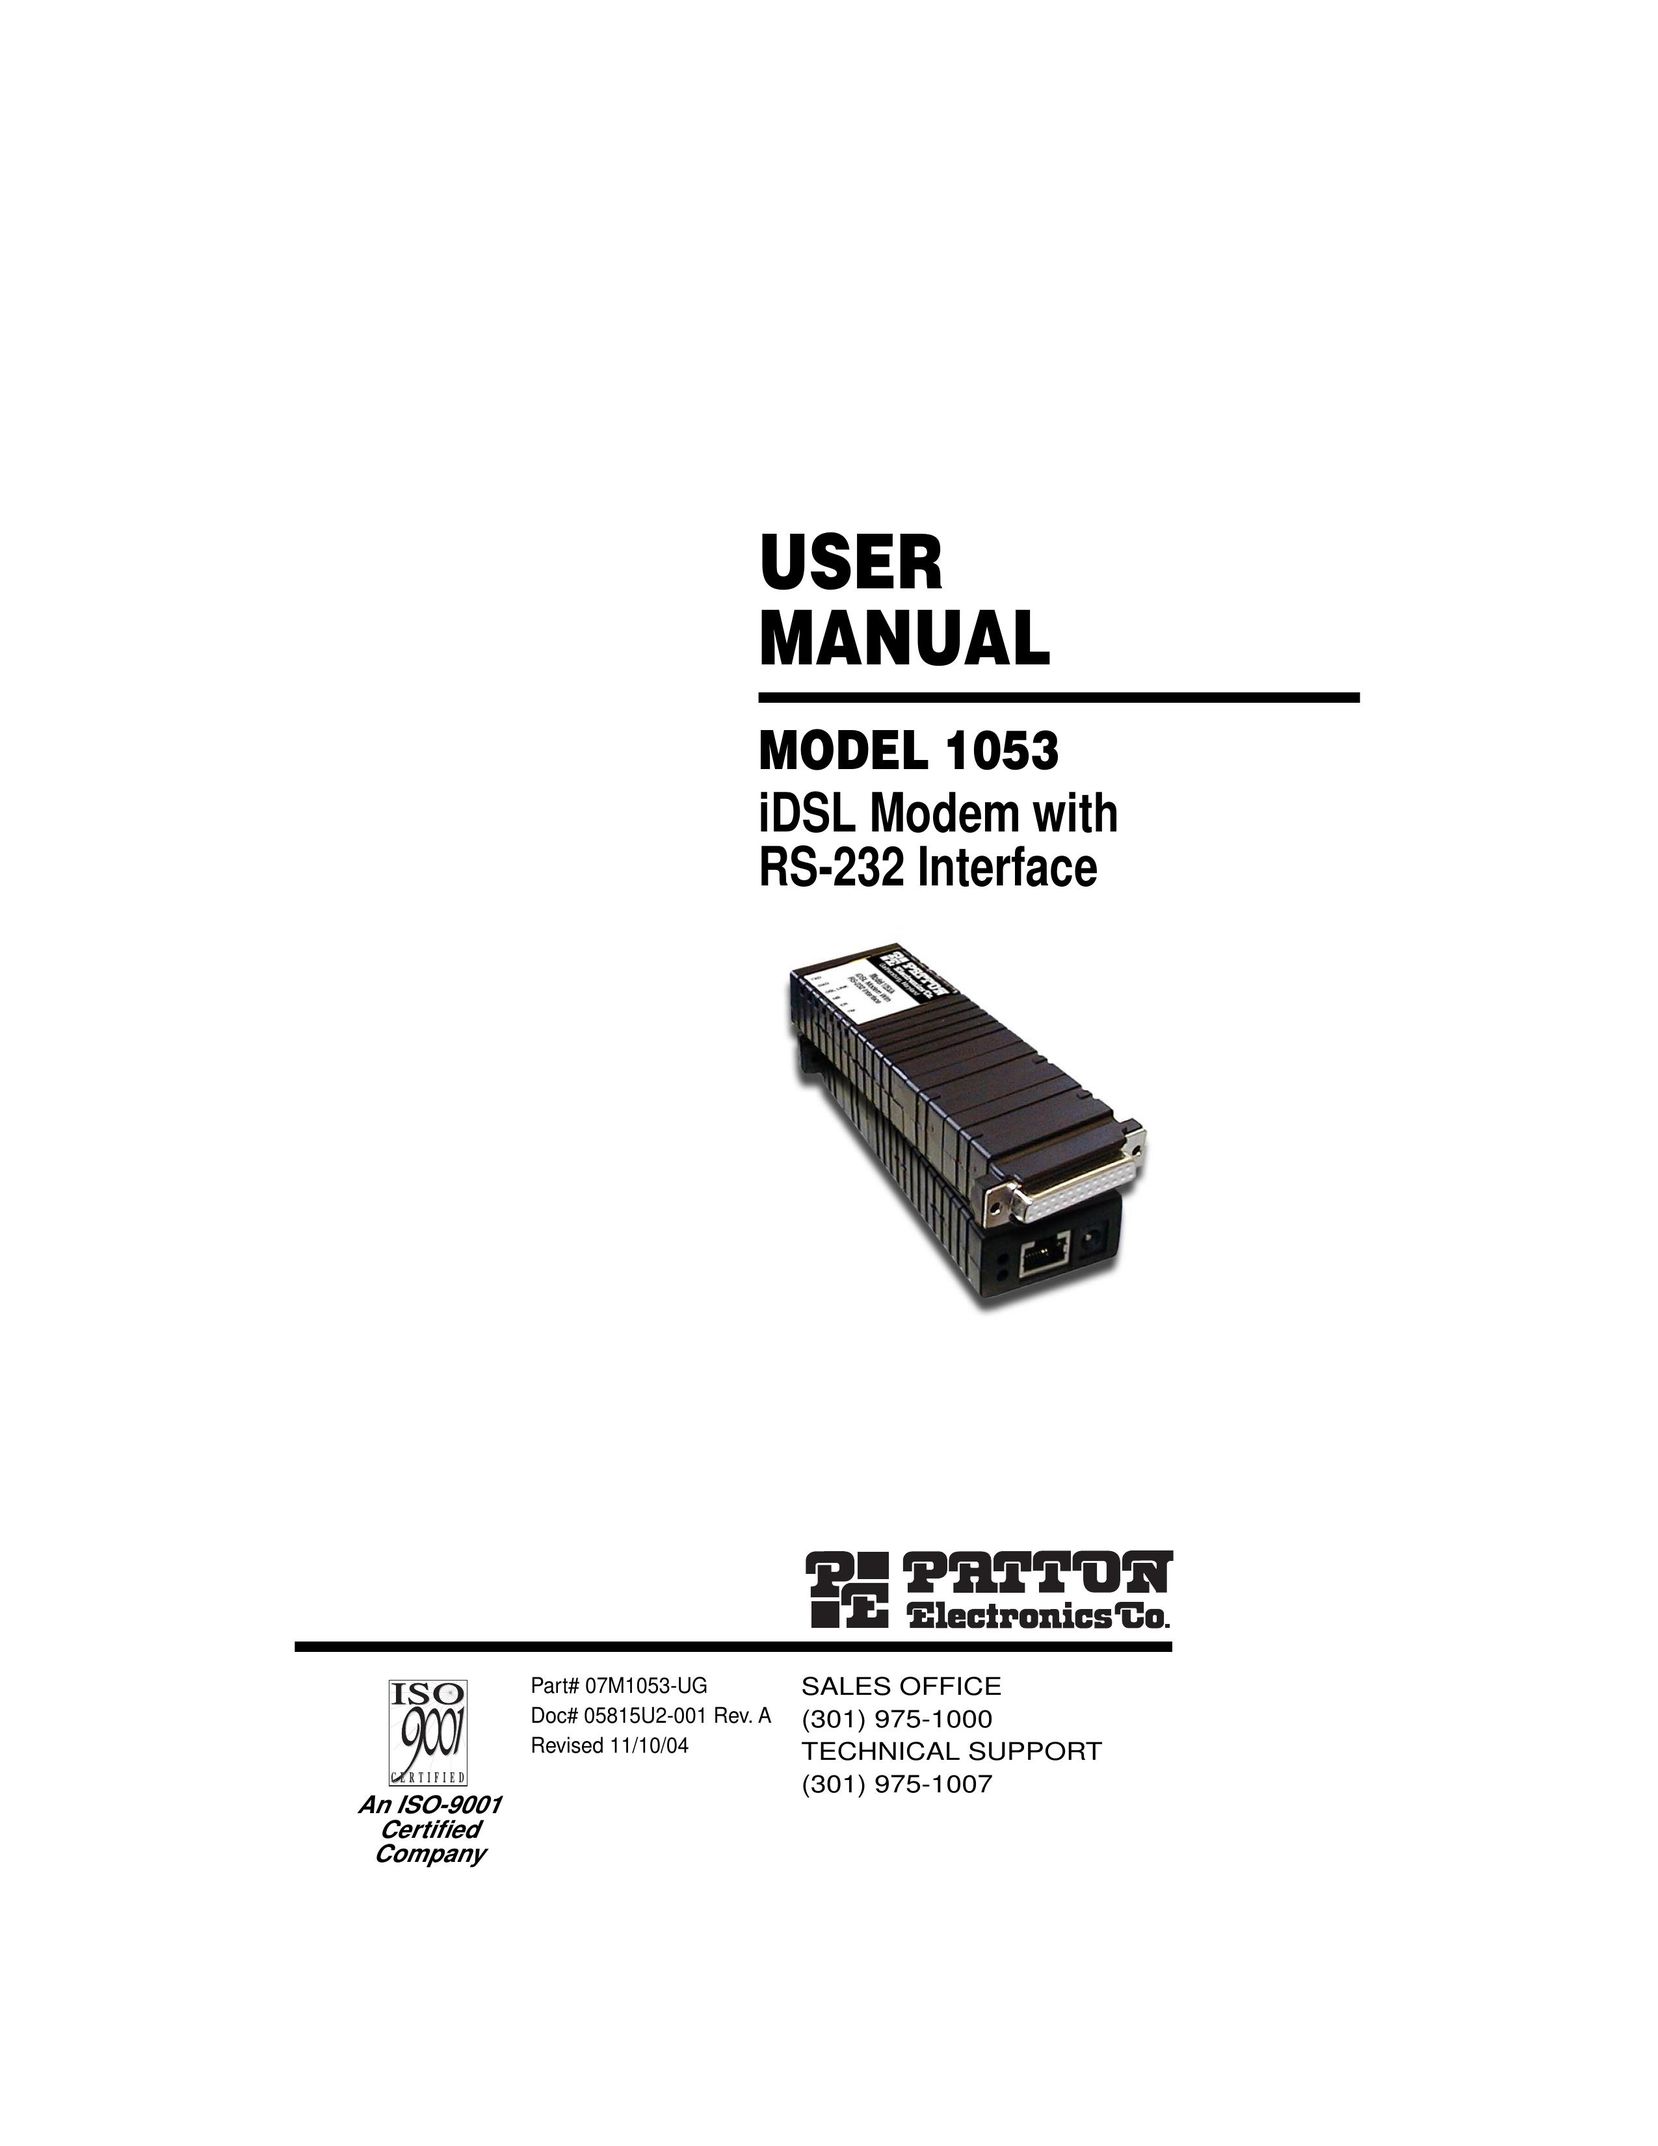 Patton electronic 1053 Network Card User Manual